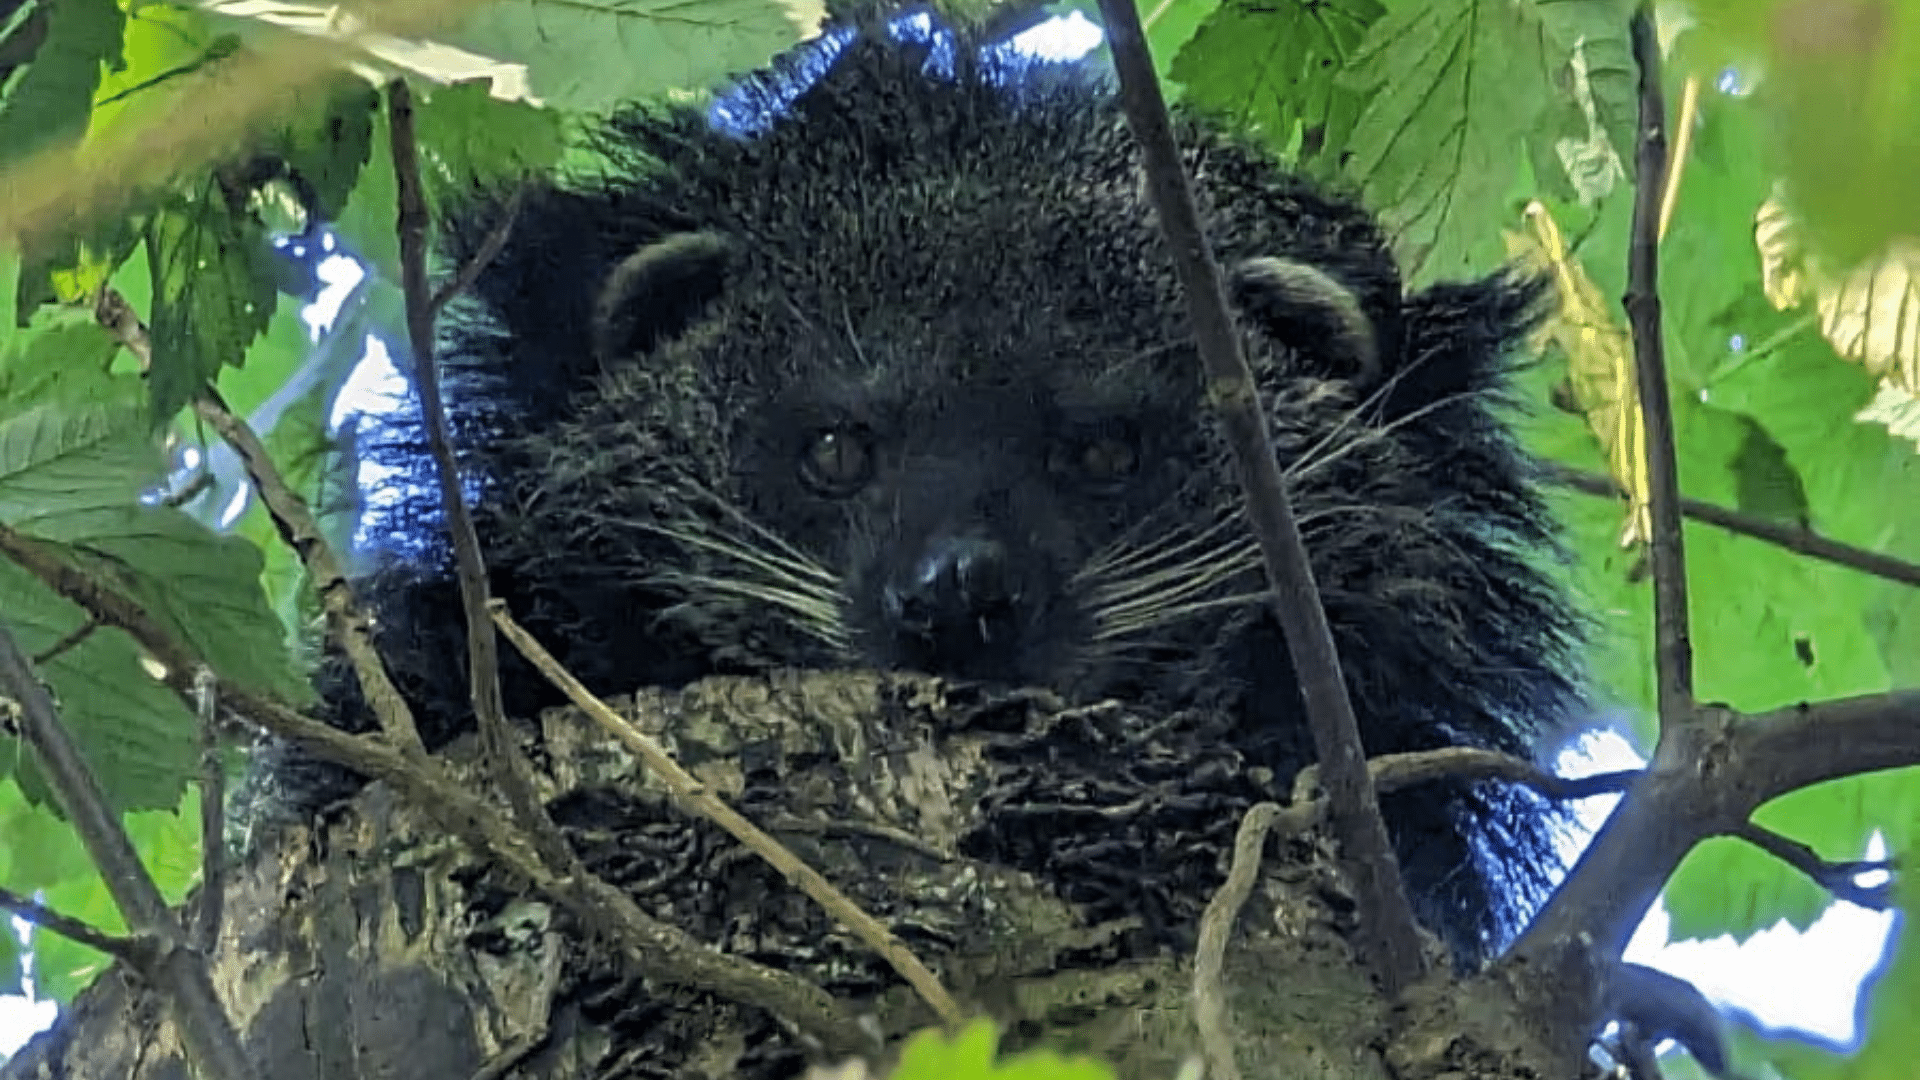 Missing binturong has been found safe and returned to Dartmoor Zoo!